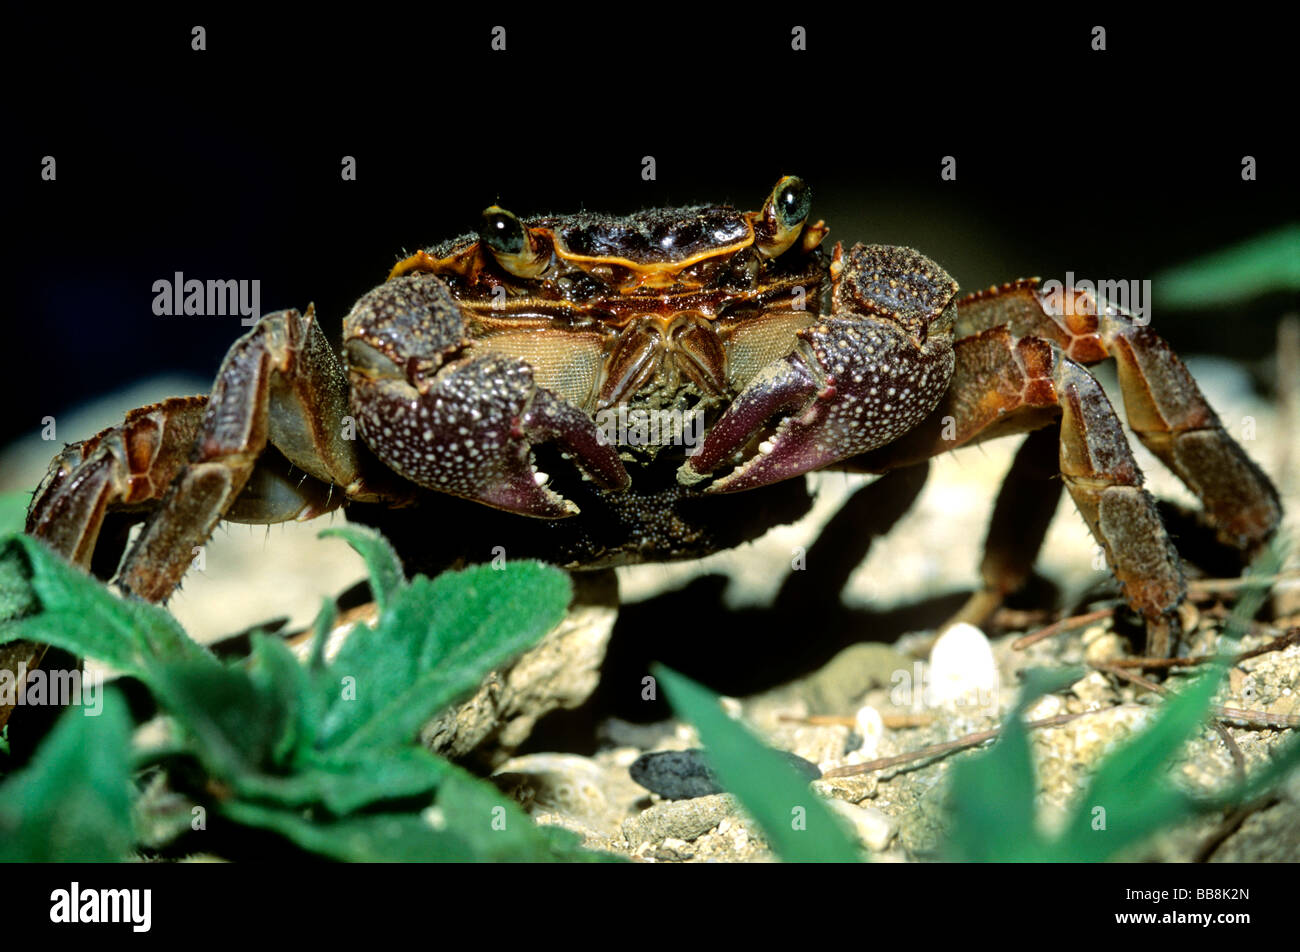 Crab with eggs, Kenting National Park, Taiwan, Asia Stock Photo